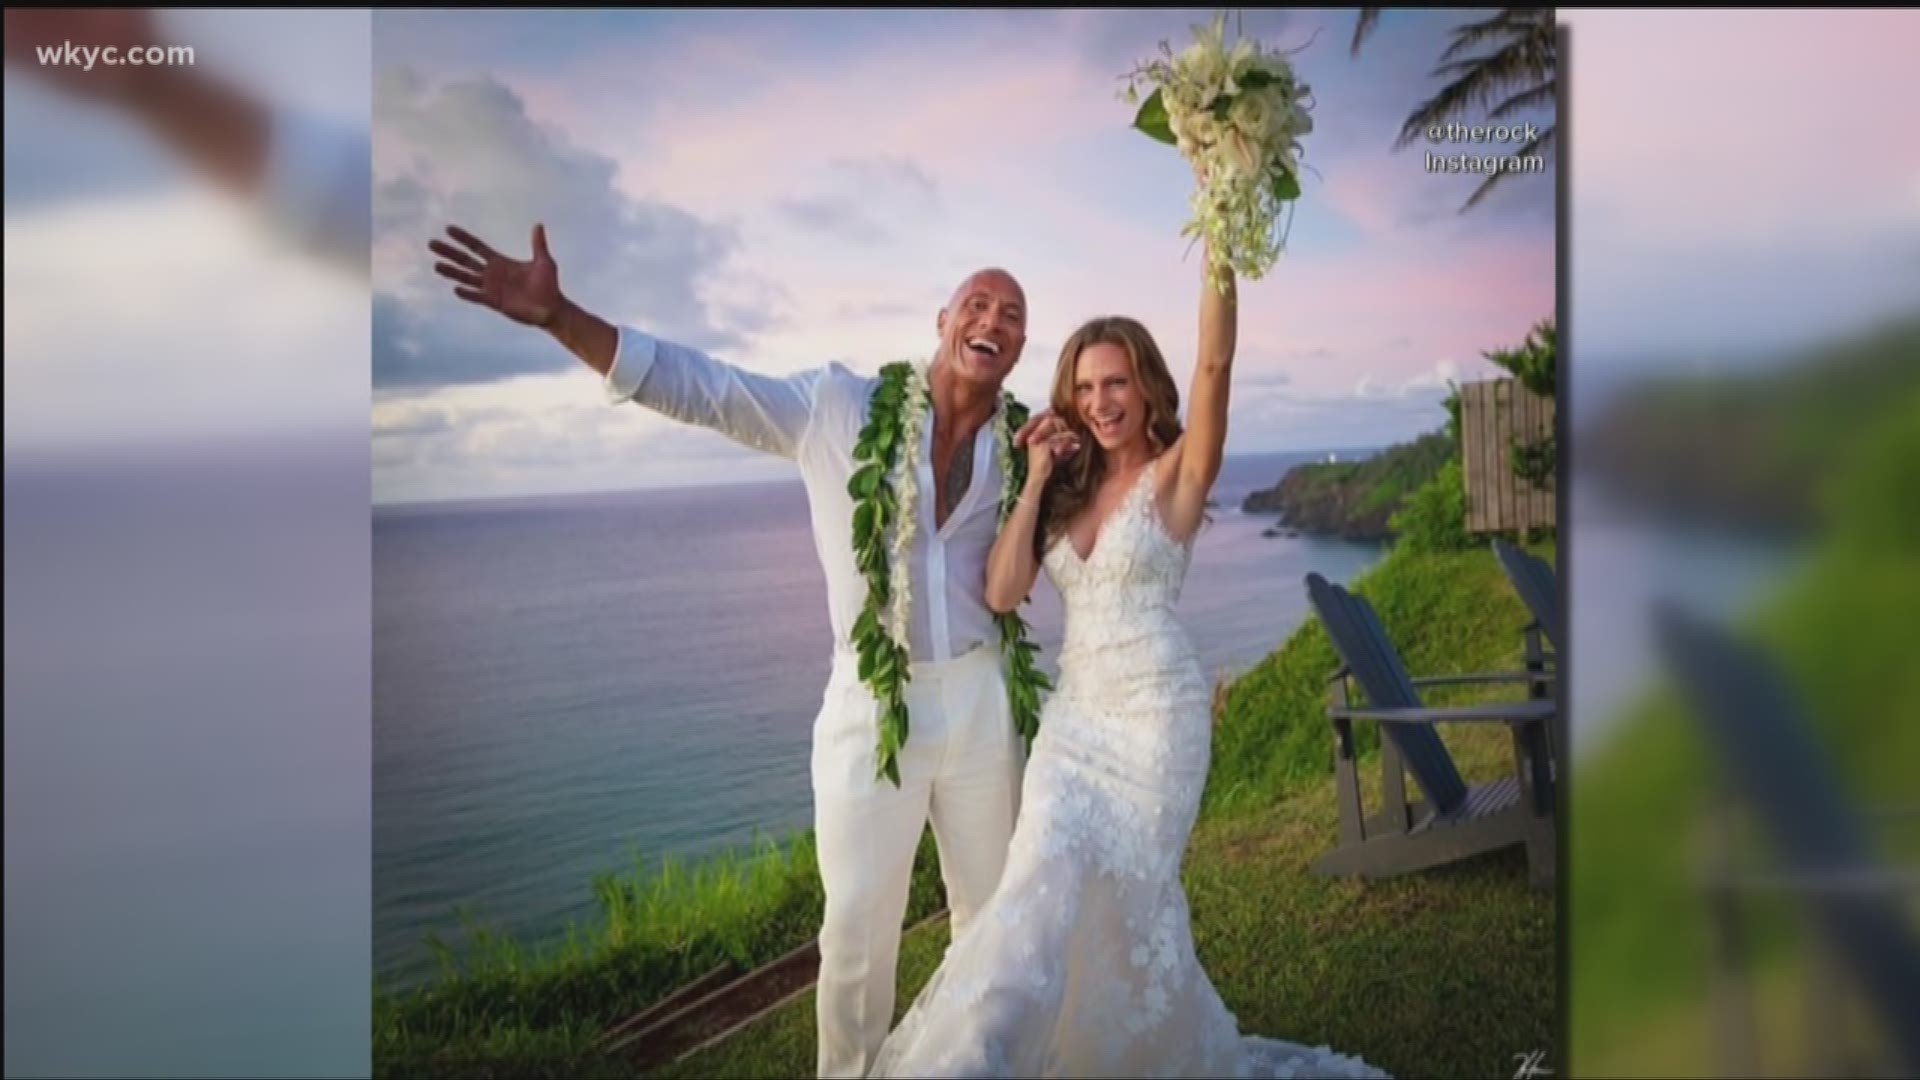 Aug. 20, 2019: Sorry, ladies. The Rock is a married man. We also explore a big chicken sandwich debate that's taking over social media.